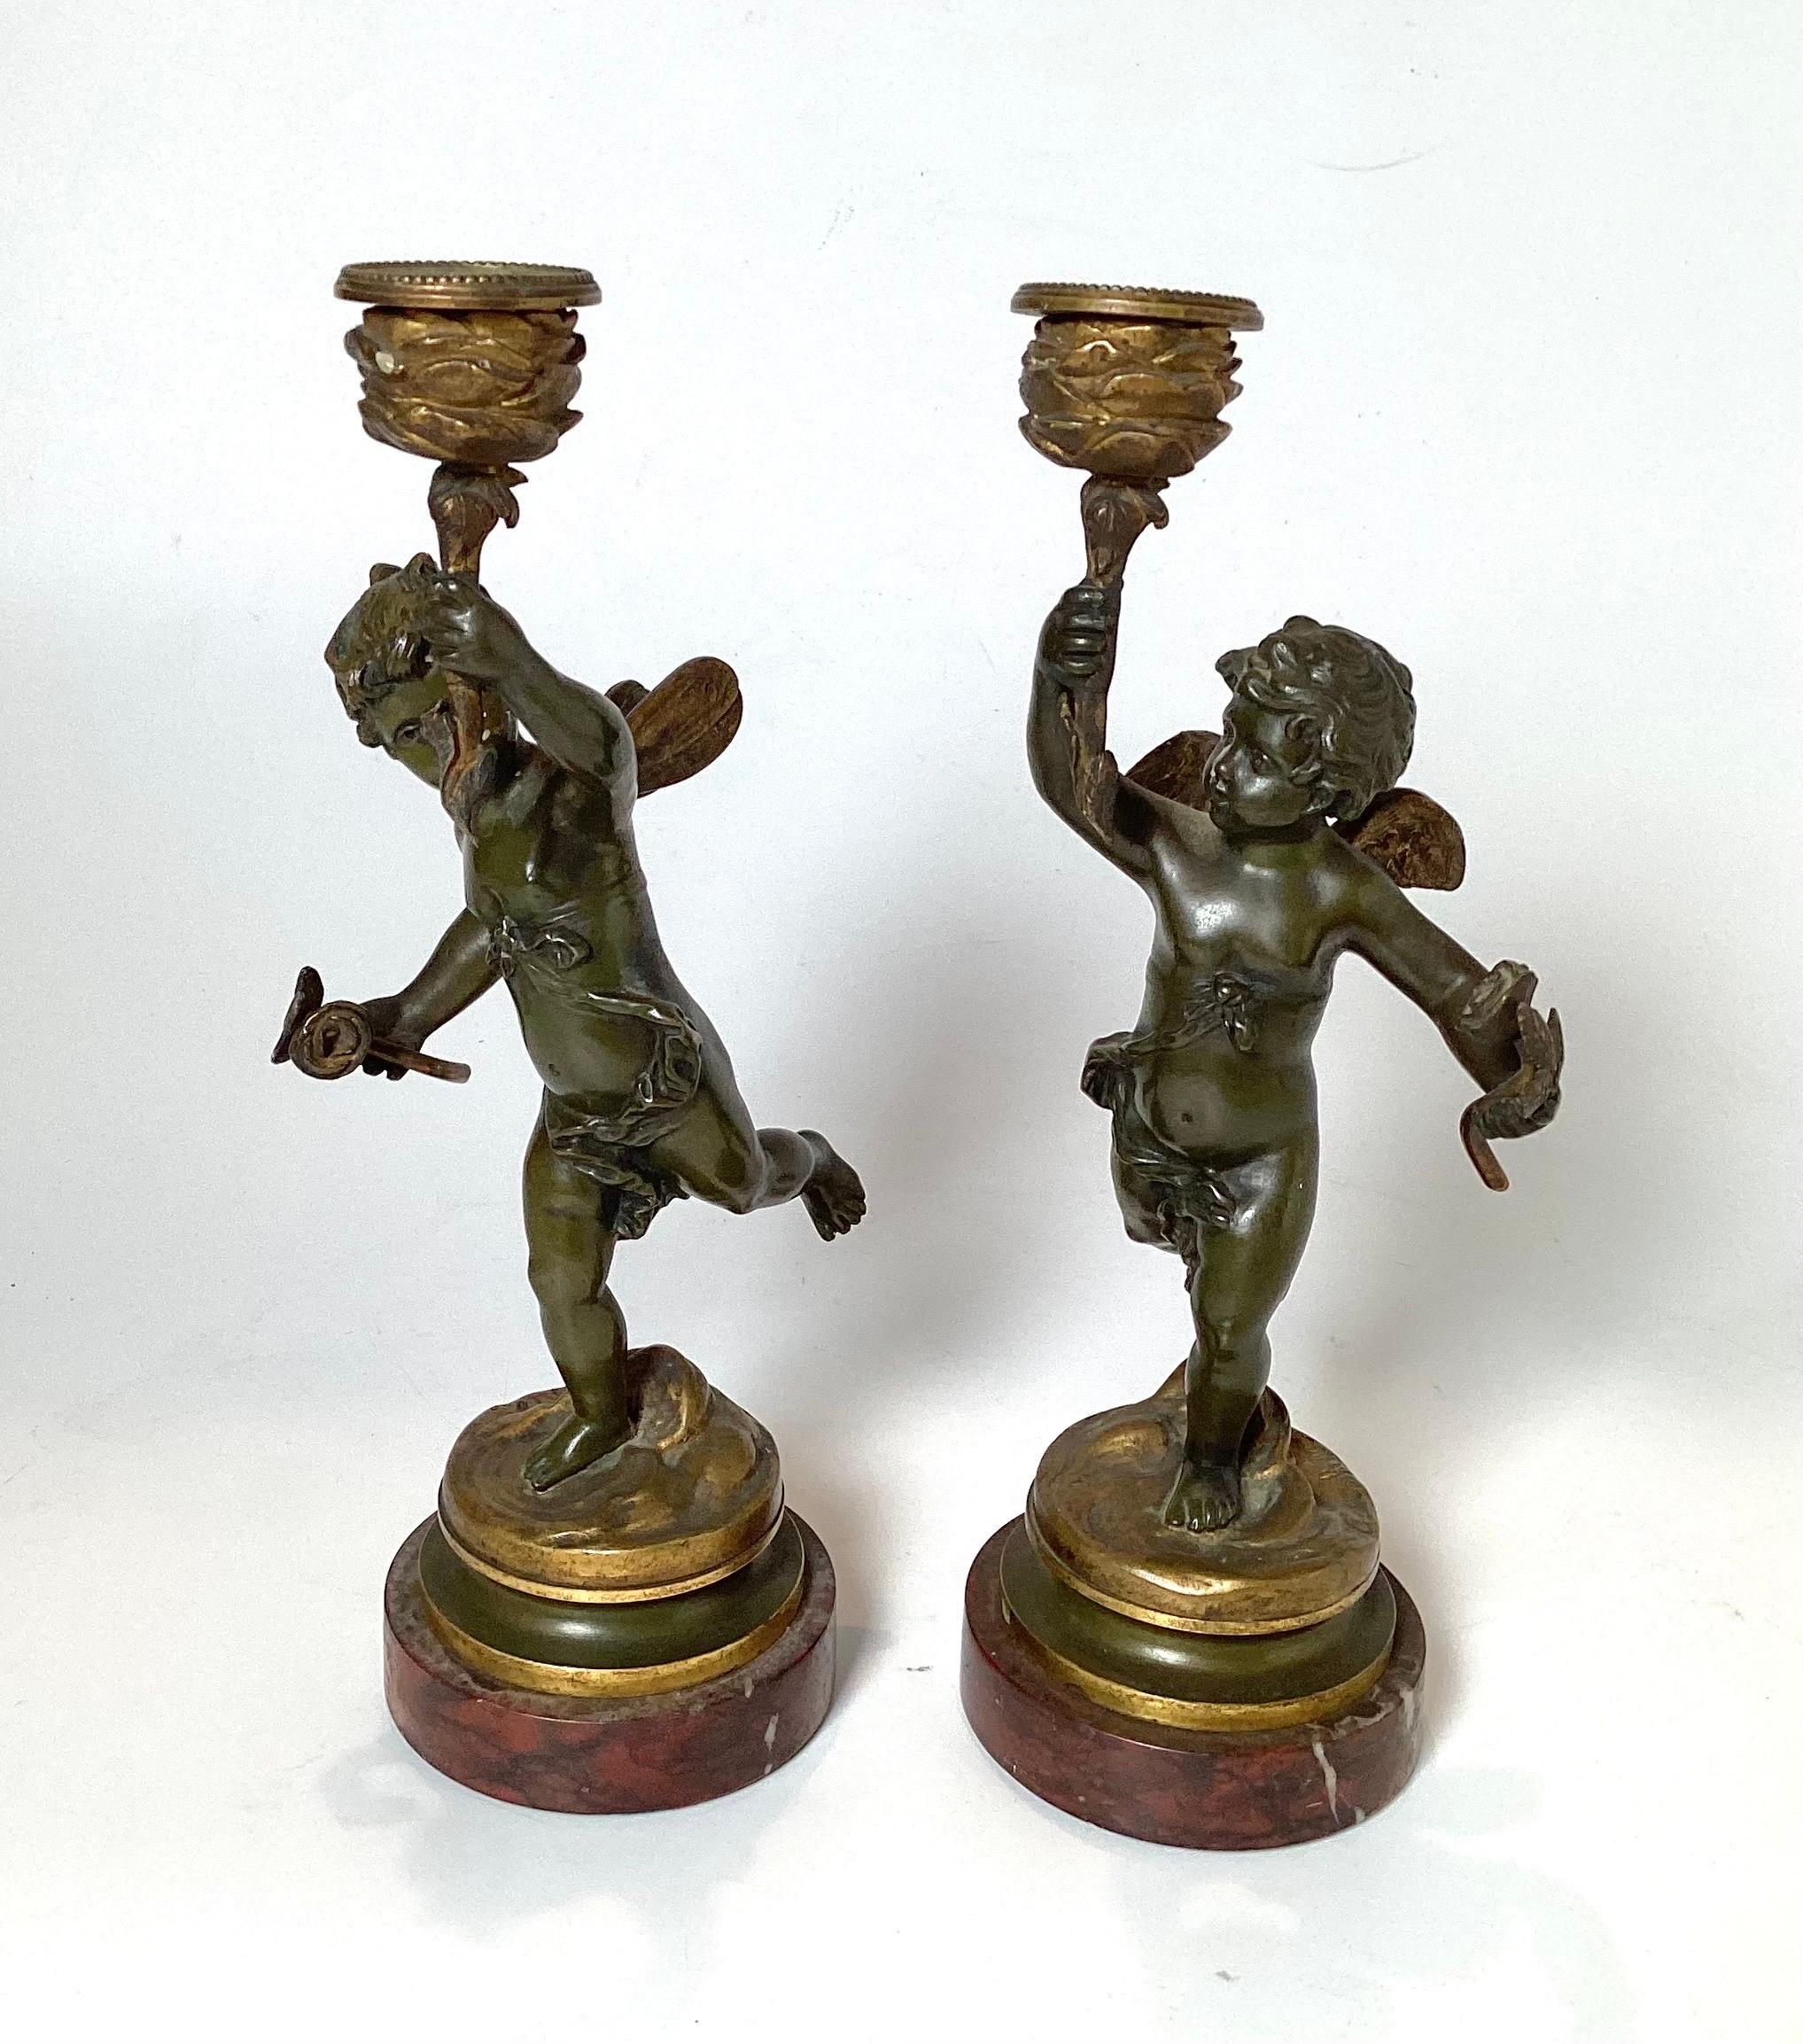 Early 20th Century Pair of bronze Cherub candlesticks on marble bases with great  warm aged patination. Great detail and signed by artist on bases.